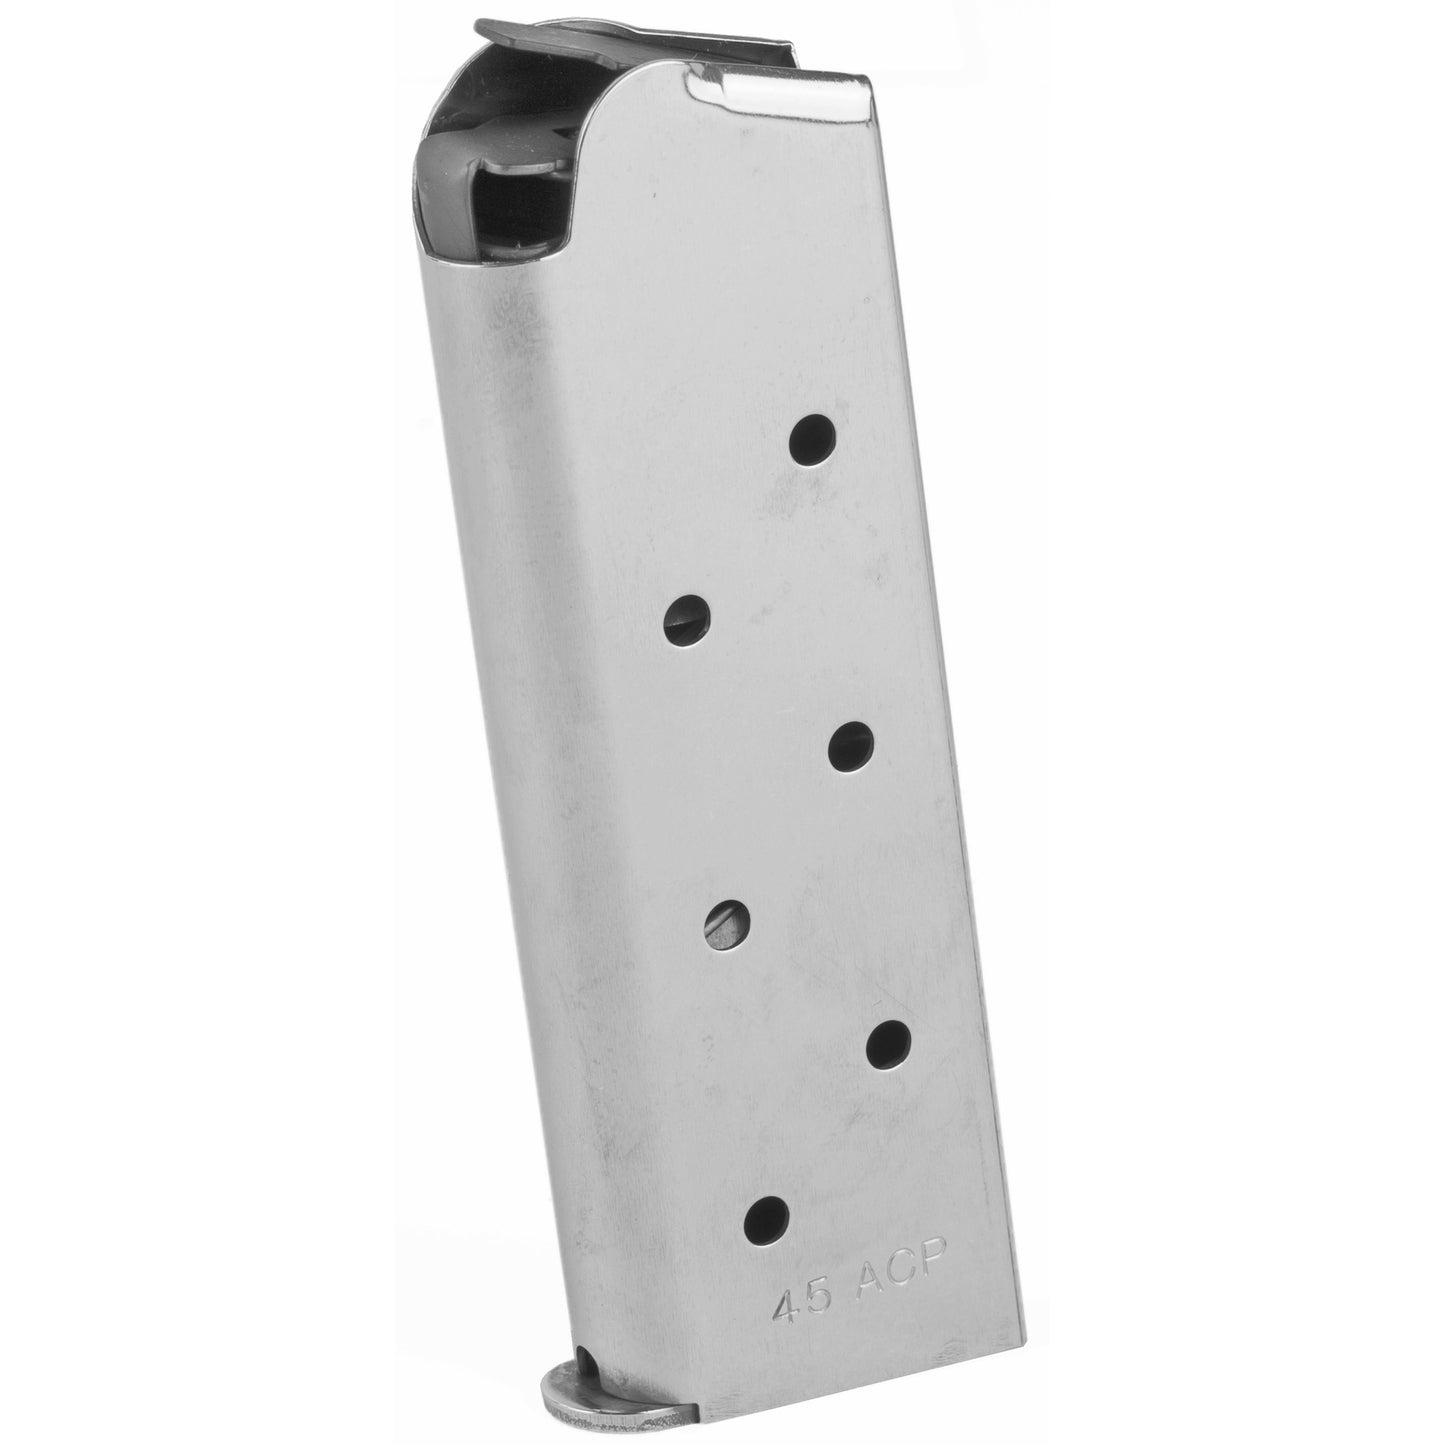 Colt's Manufacturing Magazine 45ACP 7 Rounds Fits 1911 Stainless 579991-RP - California Shooting Supplies